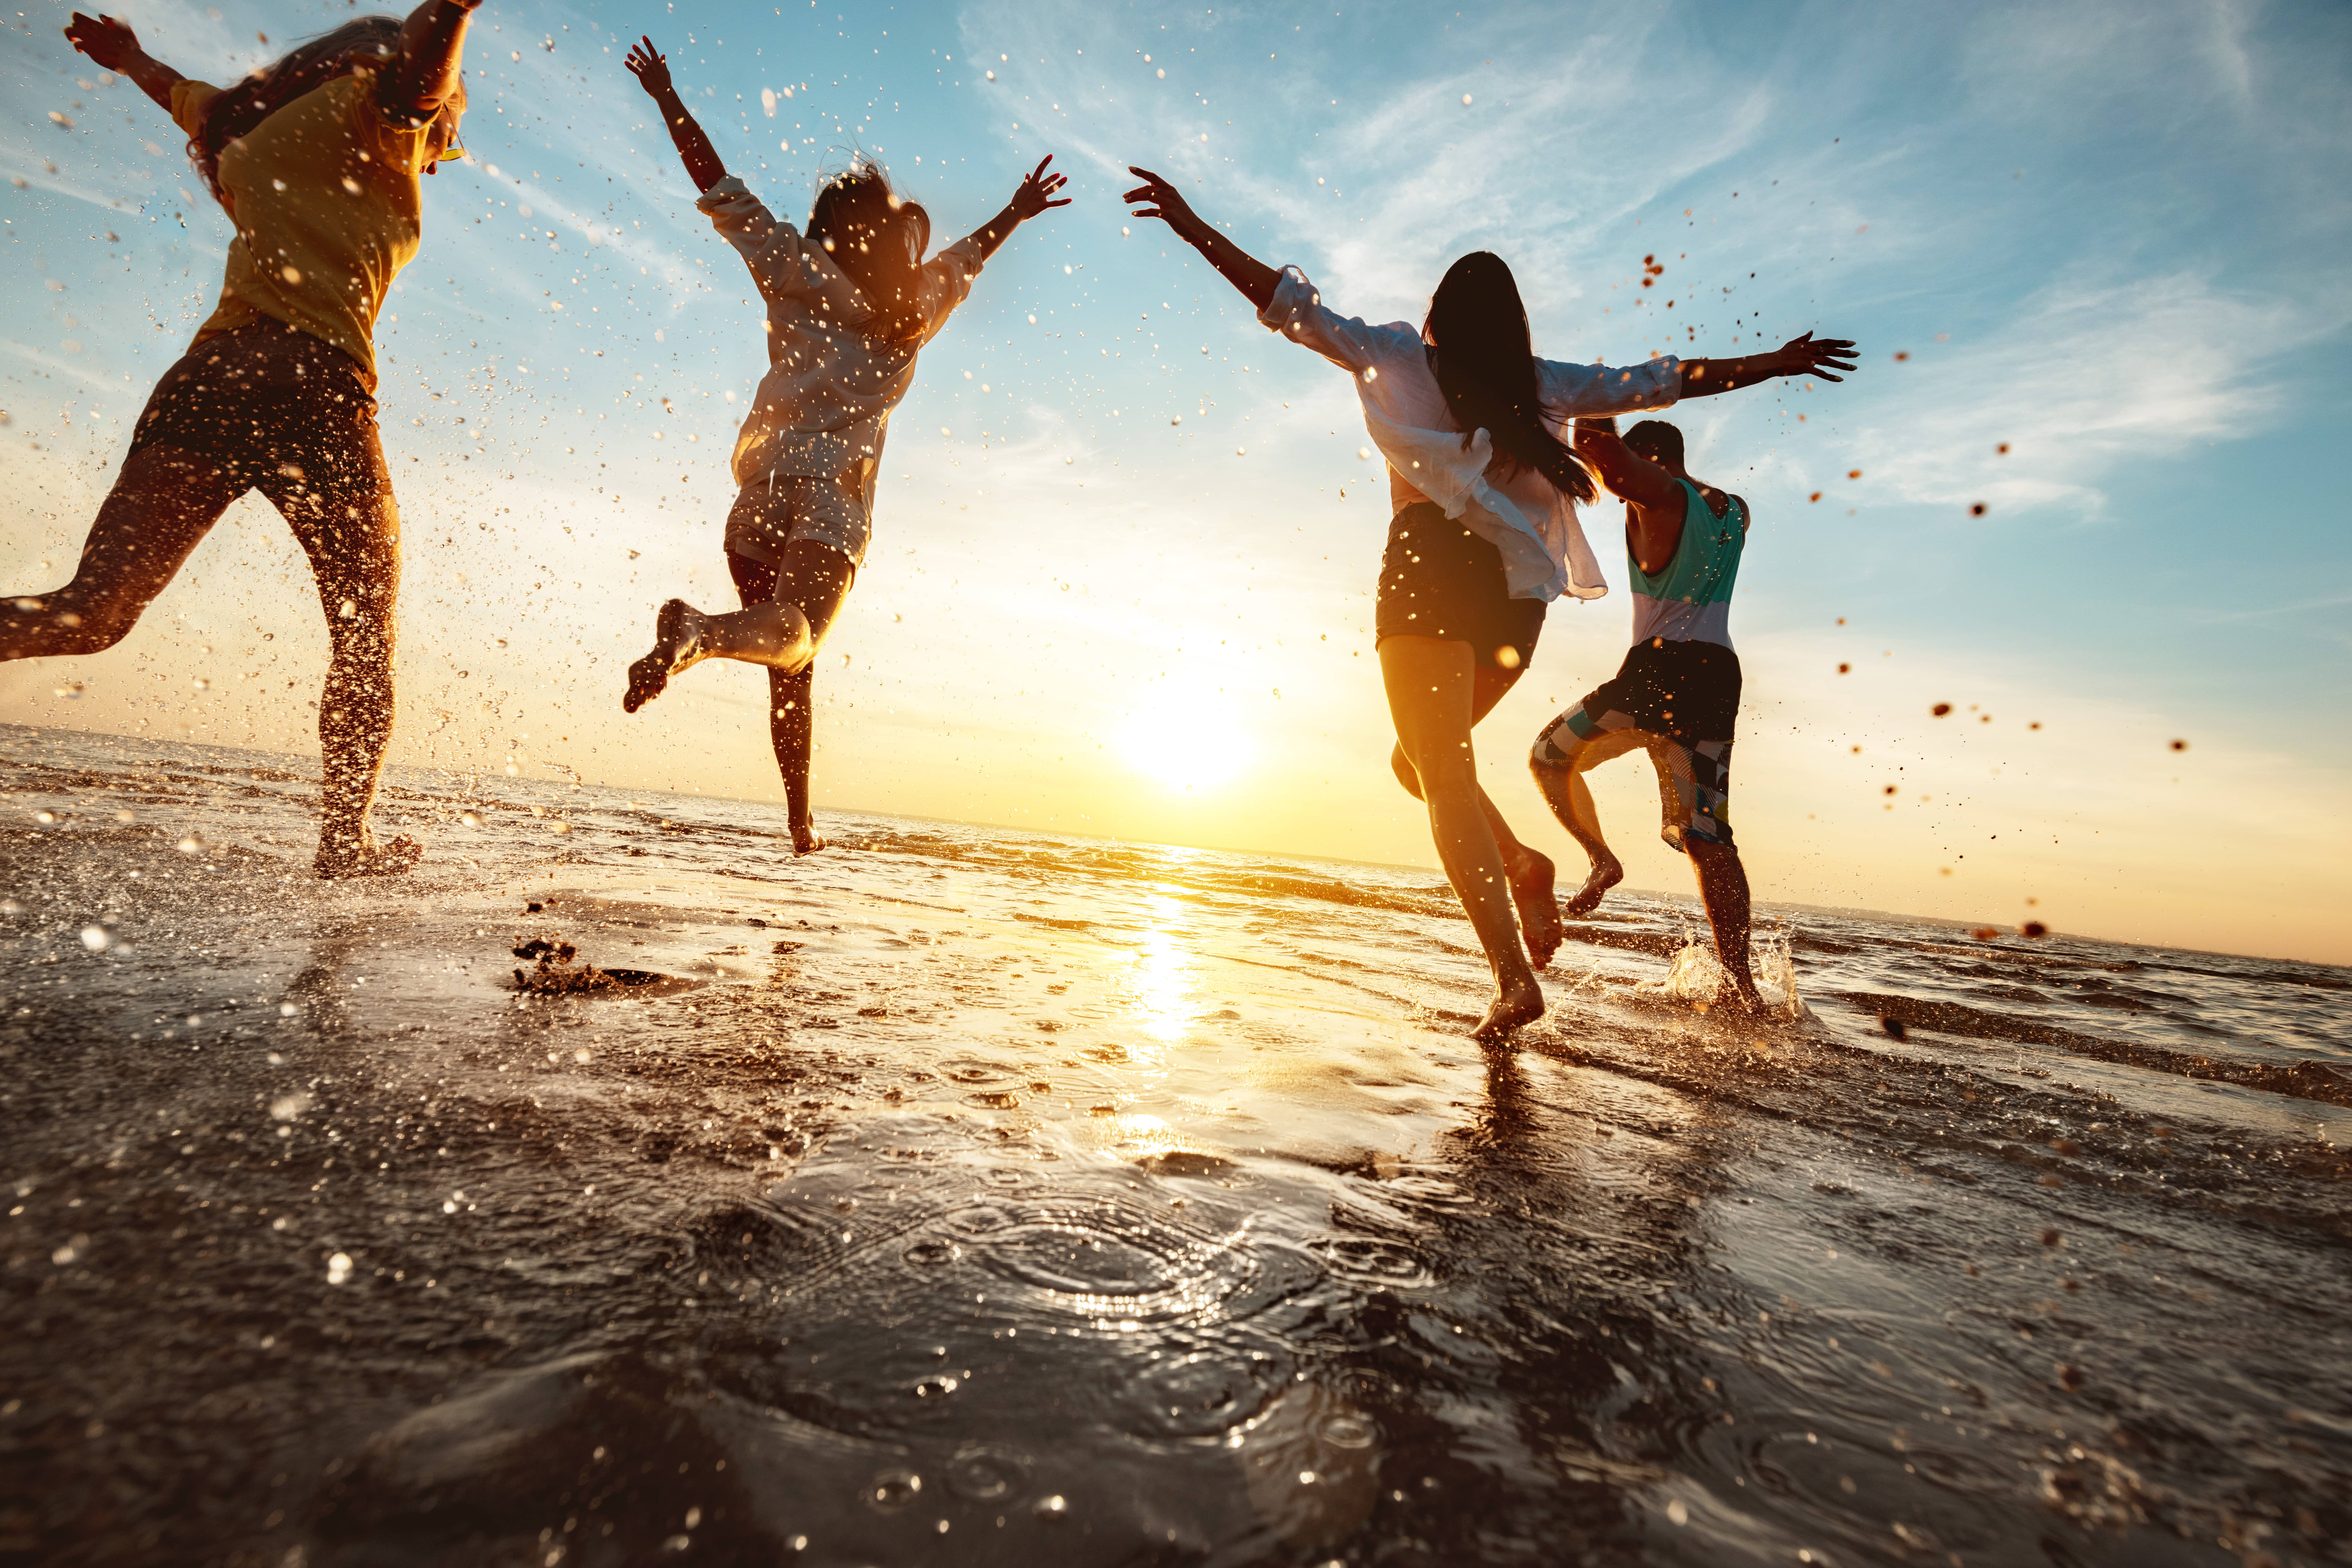 Friends jumping on the beach at sunset, splashing water around, reflecting an active lifestyle in a humid climate suitable for skincare topics.